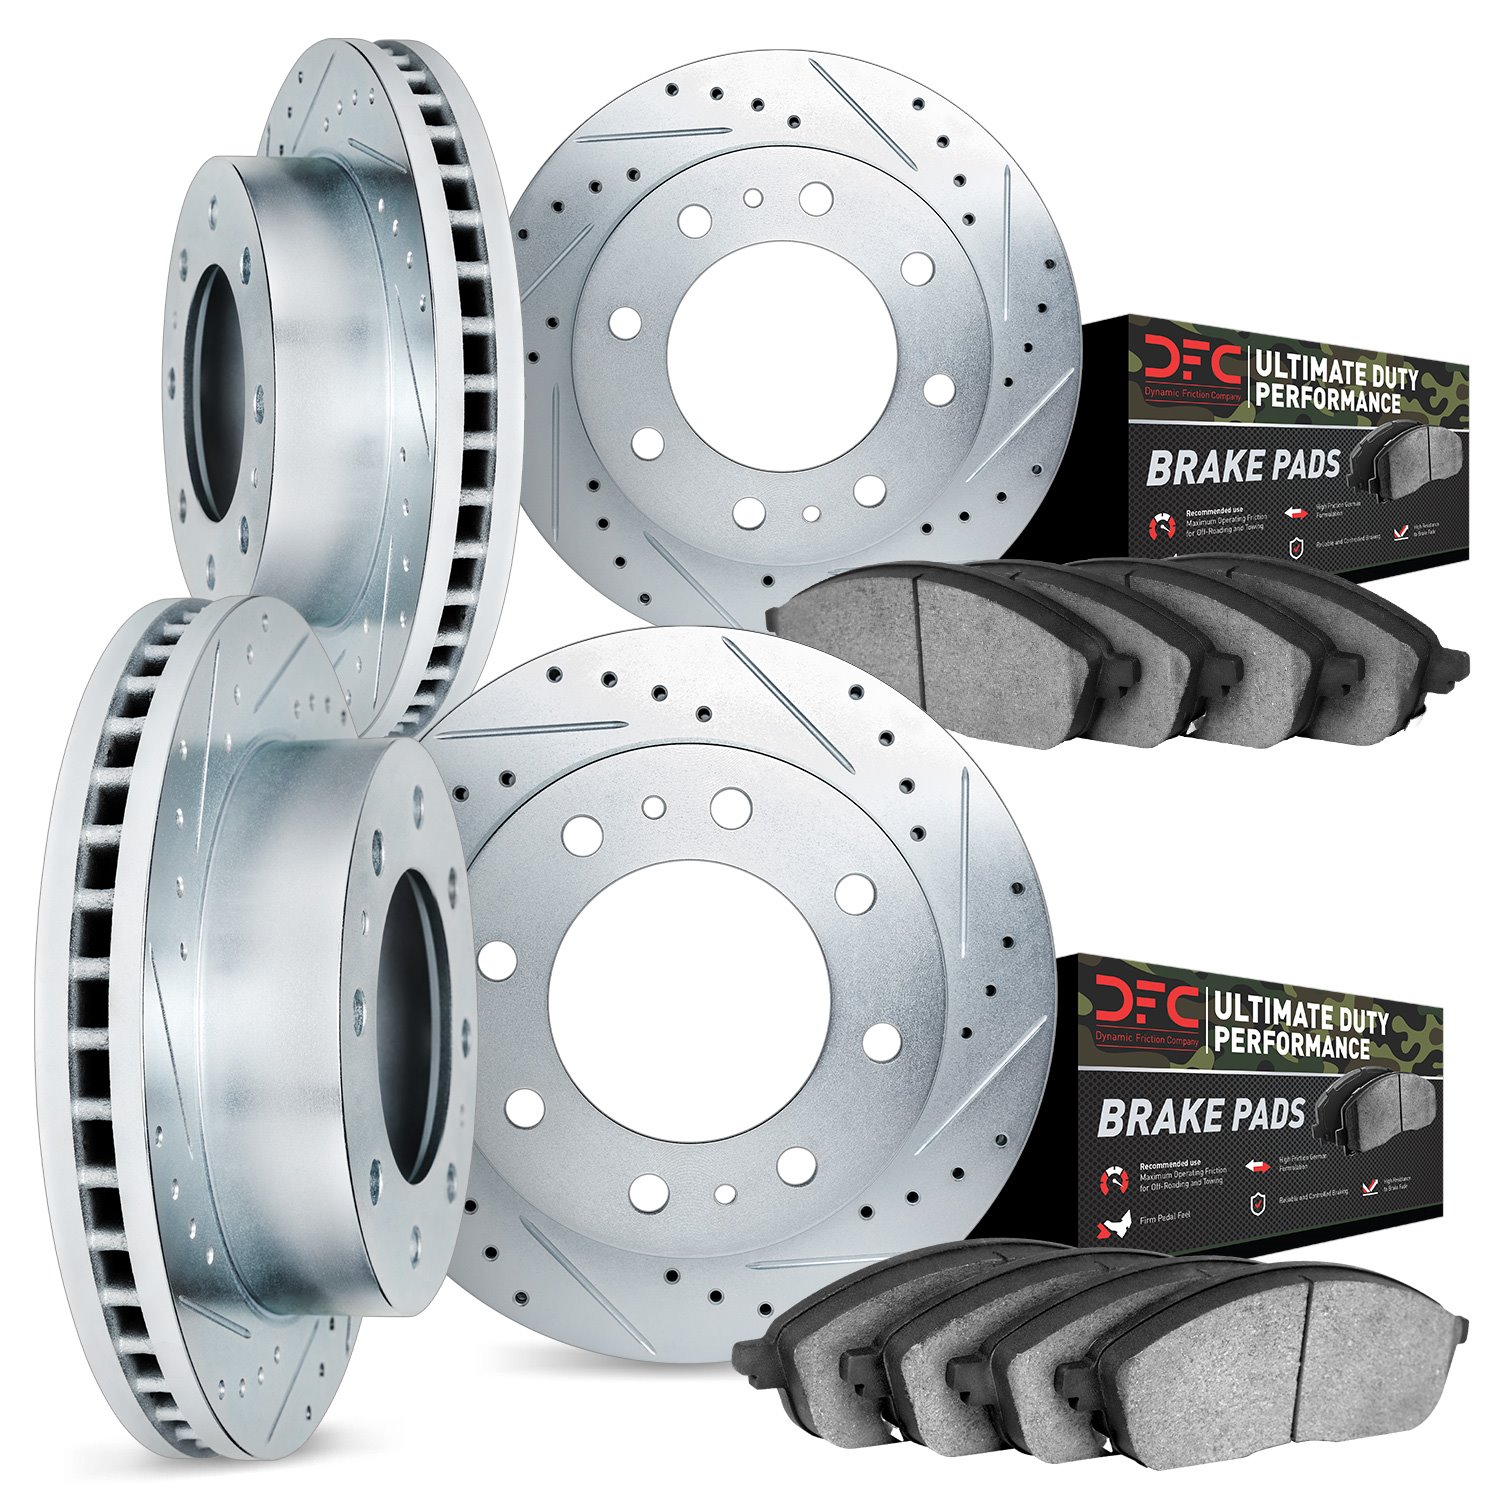 7404-54038 Drilled/Slotted Brake Rotors with Ultimate-Duty Brake Pads Kit [Silver], 2010-2012 Ford/Lincoln/Mercury/Mazda, Positi